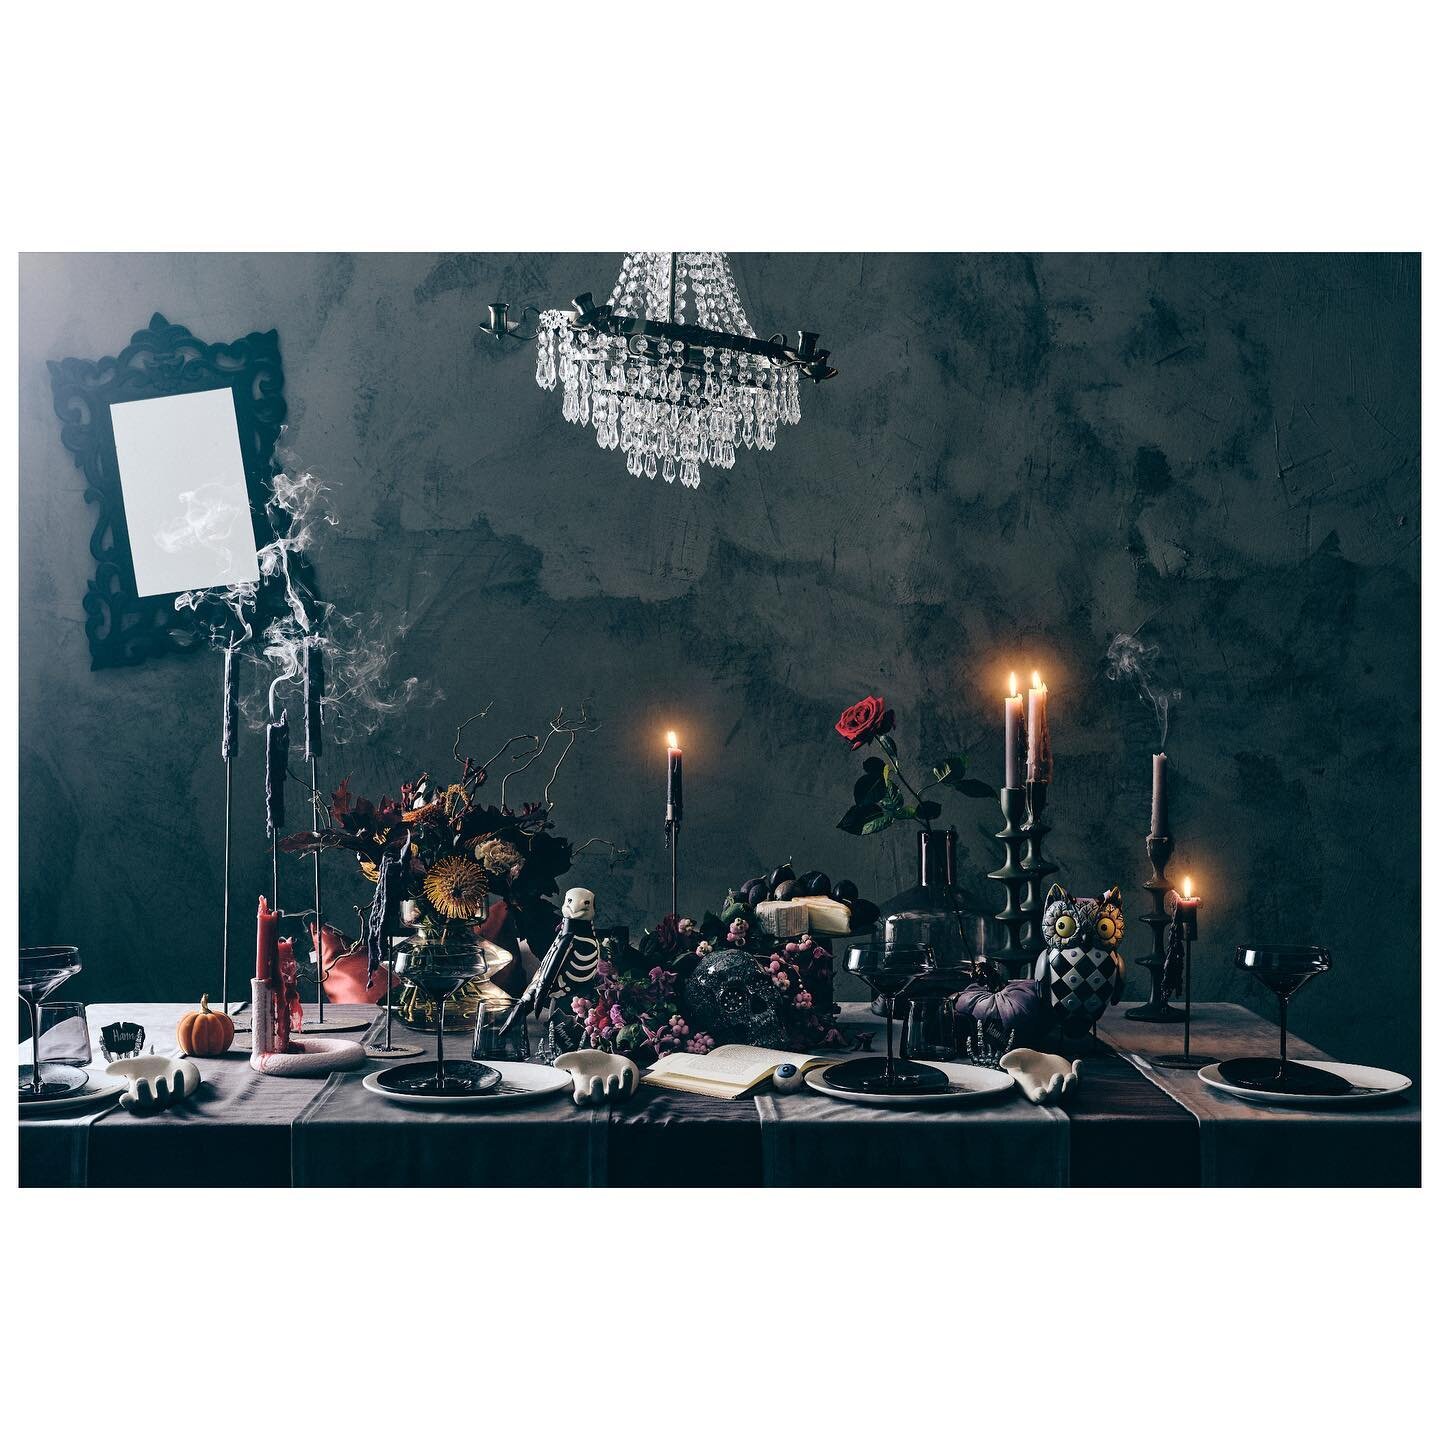 Behind the scenes - New halloween campaign shoot for @Jotex. 

Tricks? Keep it simple. My go to setup is Fujifilm GFX 100s, one Profoto D2 1000 and a white VFLAT. That&rsquo;s it. 

The VFLAT is very versatile for light shaping. Bounce the light into